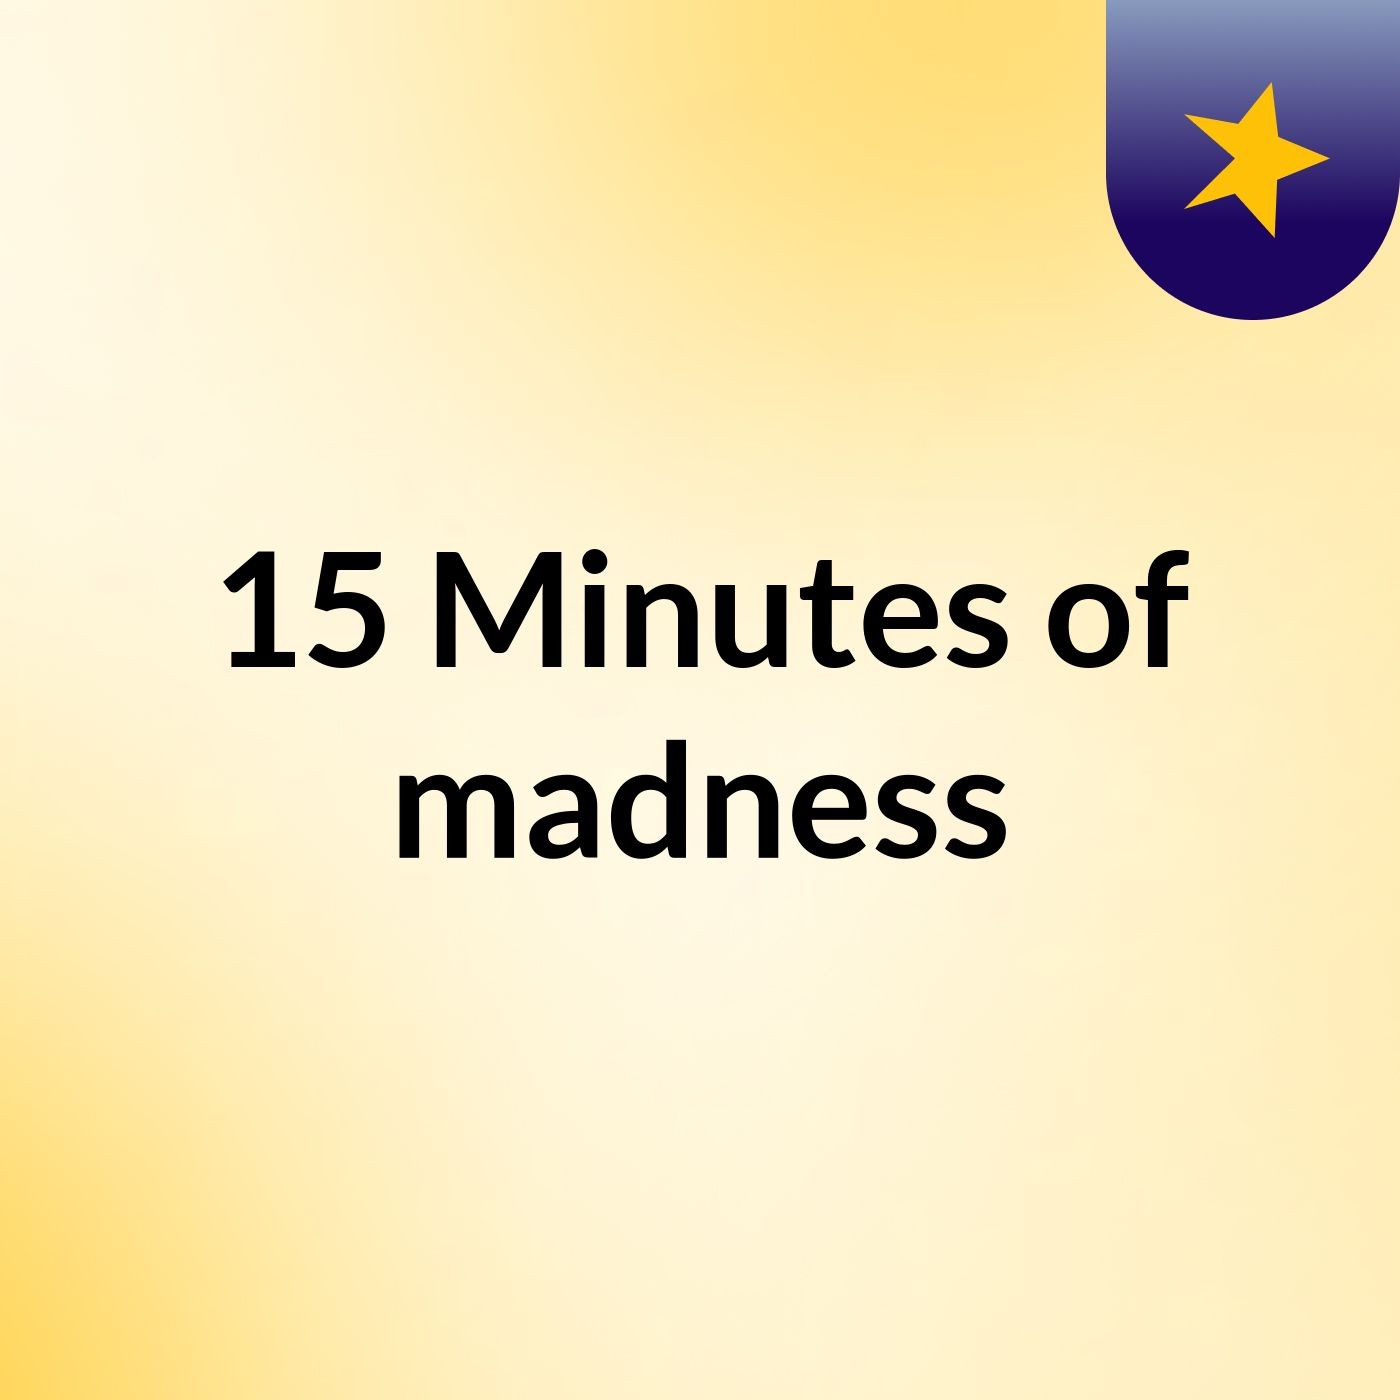 15 Minutes of madness